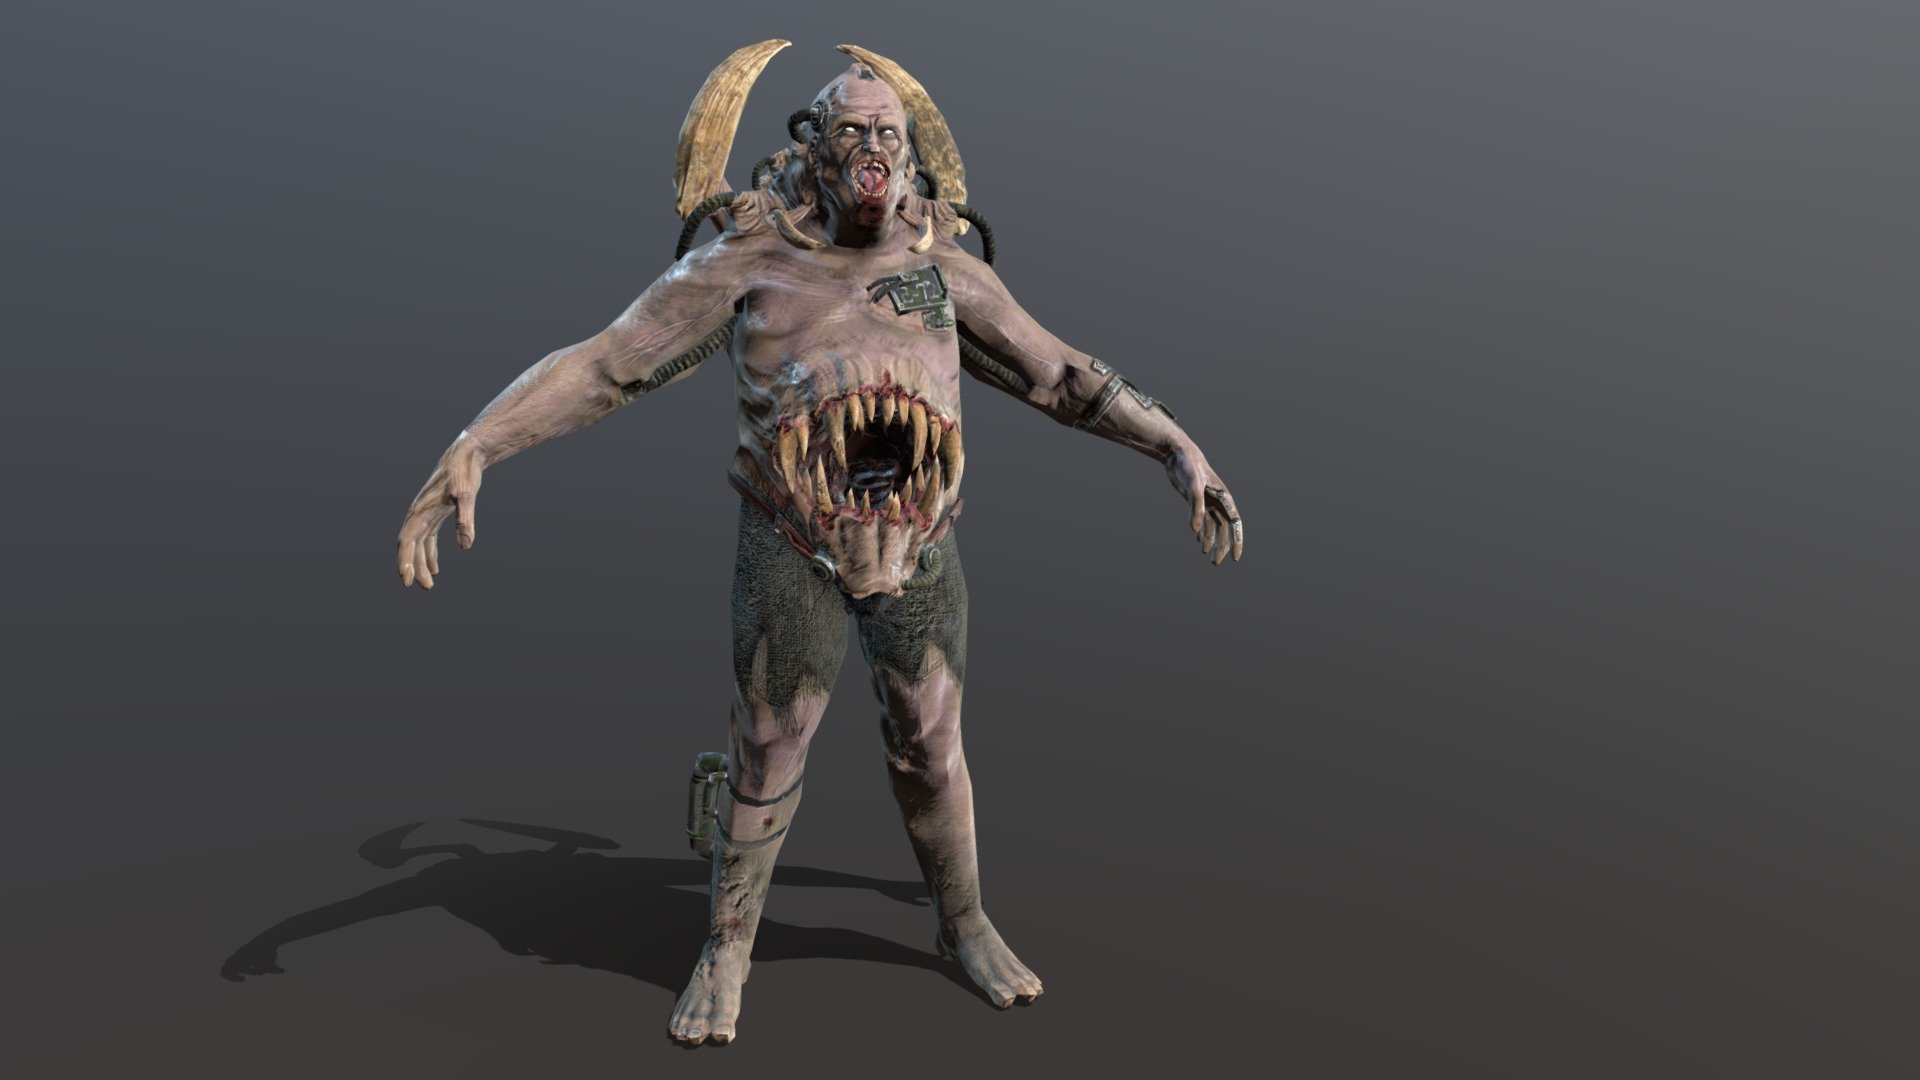 Low-poly model of the character Mutant7
Suitable for games of different genre: RPG, strategy, first-person shooter, etc.
In the archive, the basic mesh (fbx and maya)

one texture pack 4096x4096 (down to 1024х1-1024)

In the model it is desirable to use a shader with a two-sided display of polygons.

The model contains 21 animations
atack (x5)
walking (x4)
running (x1)
Straif LR (x2)
idle (x2)
death (x4)
rage
gethit

faces 8460
verts 8542
tris 16175 - Mutant 7 - Buy Royalty Free 3D model by dremorn 3d model